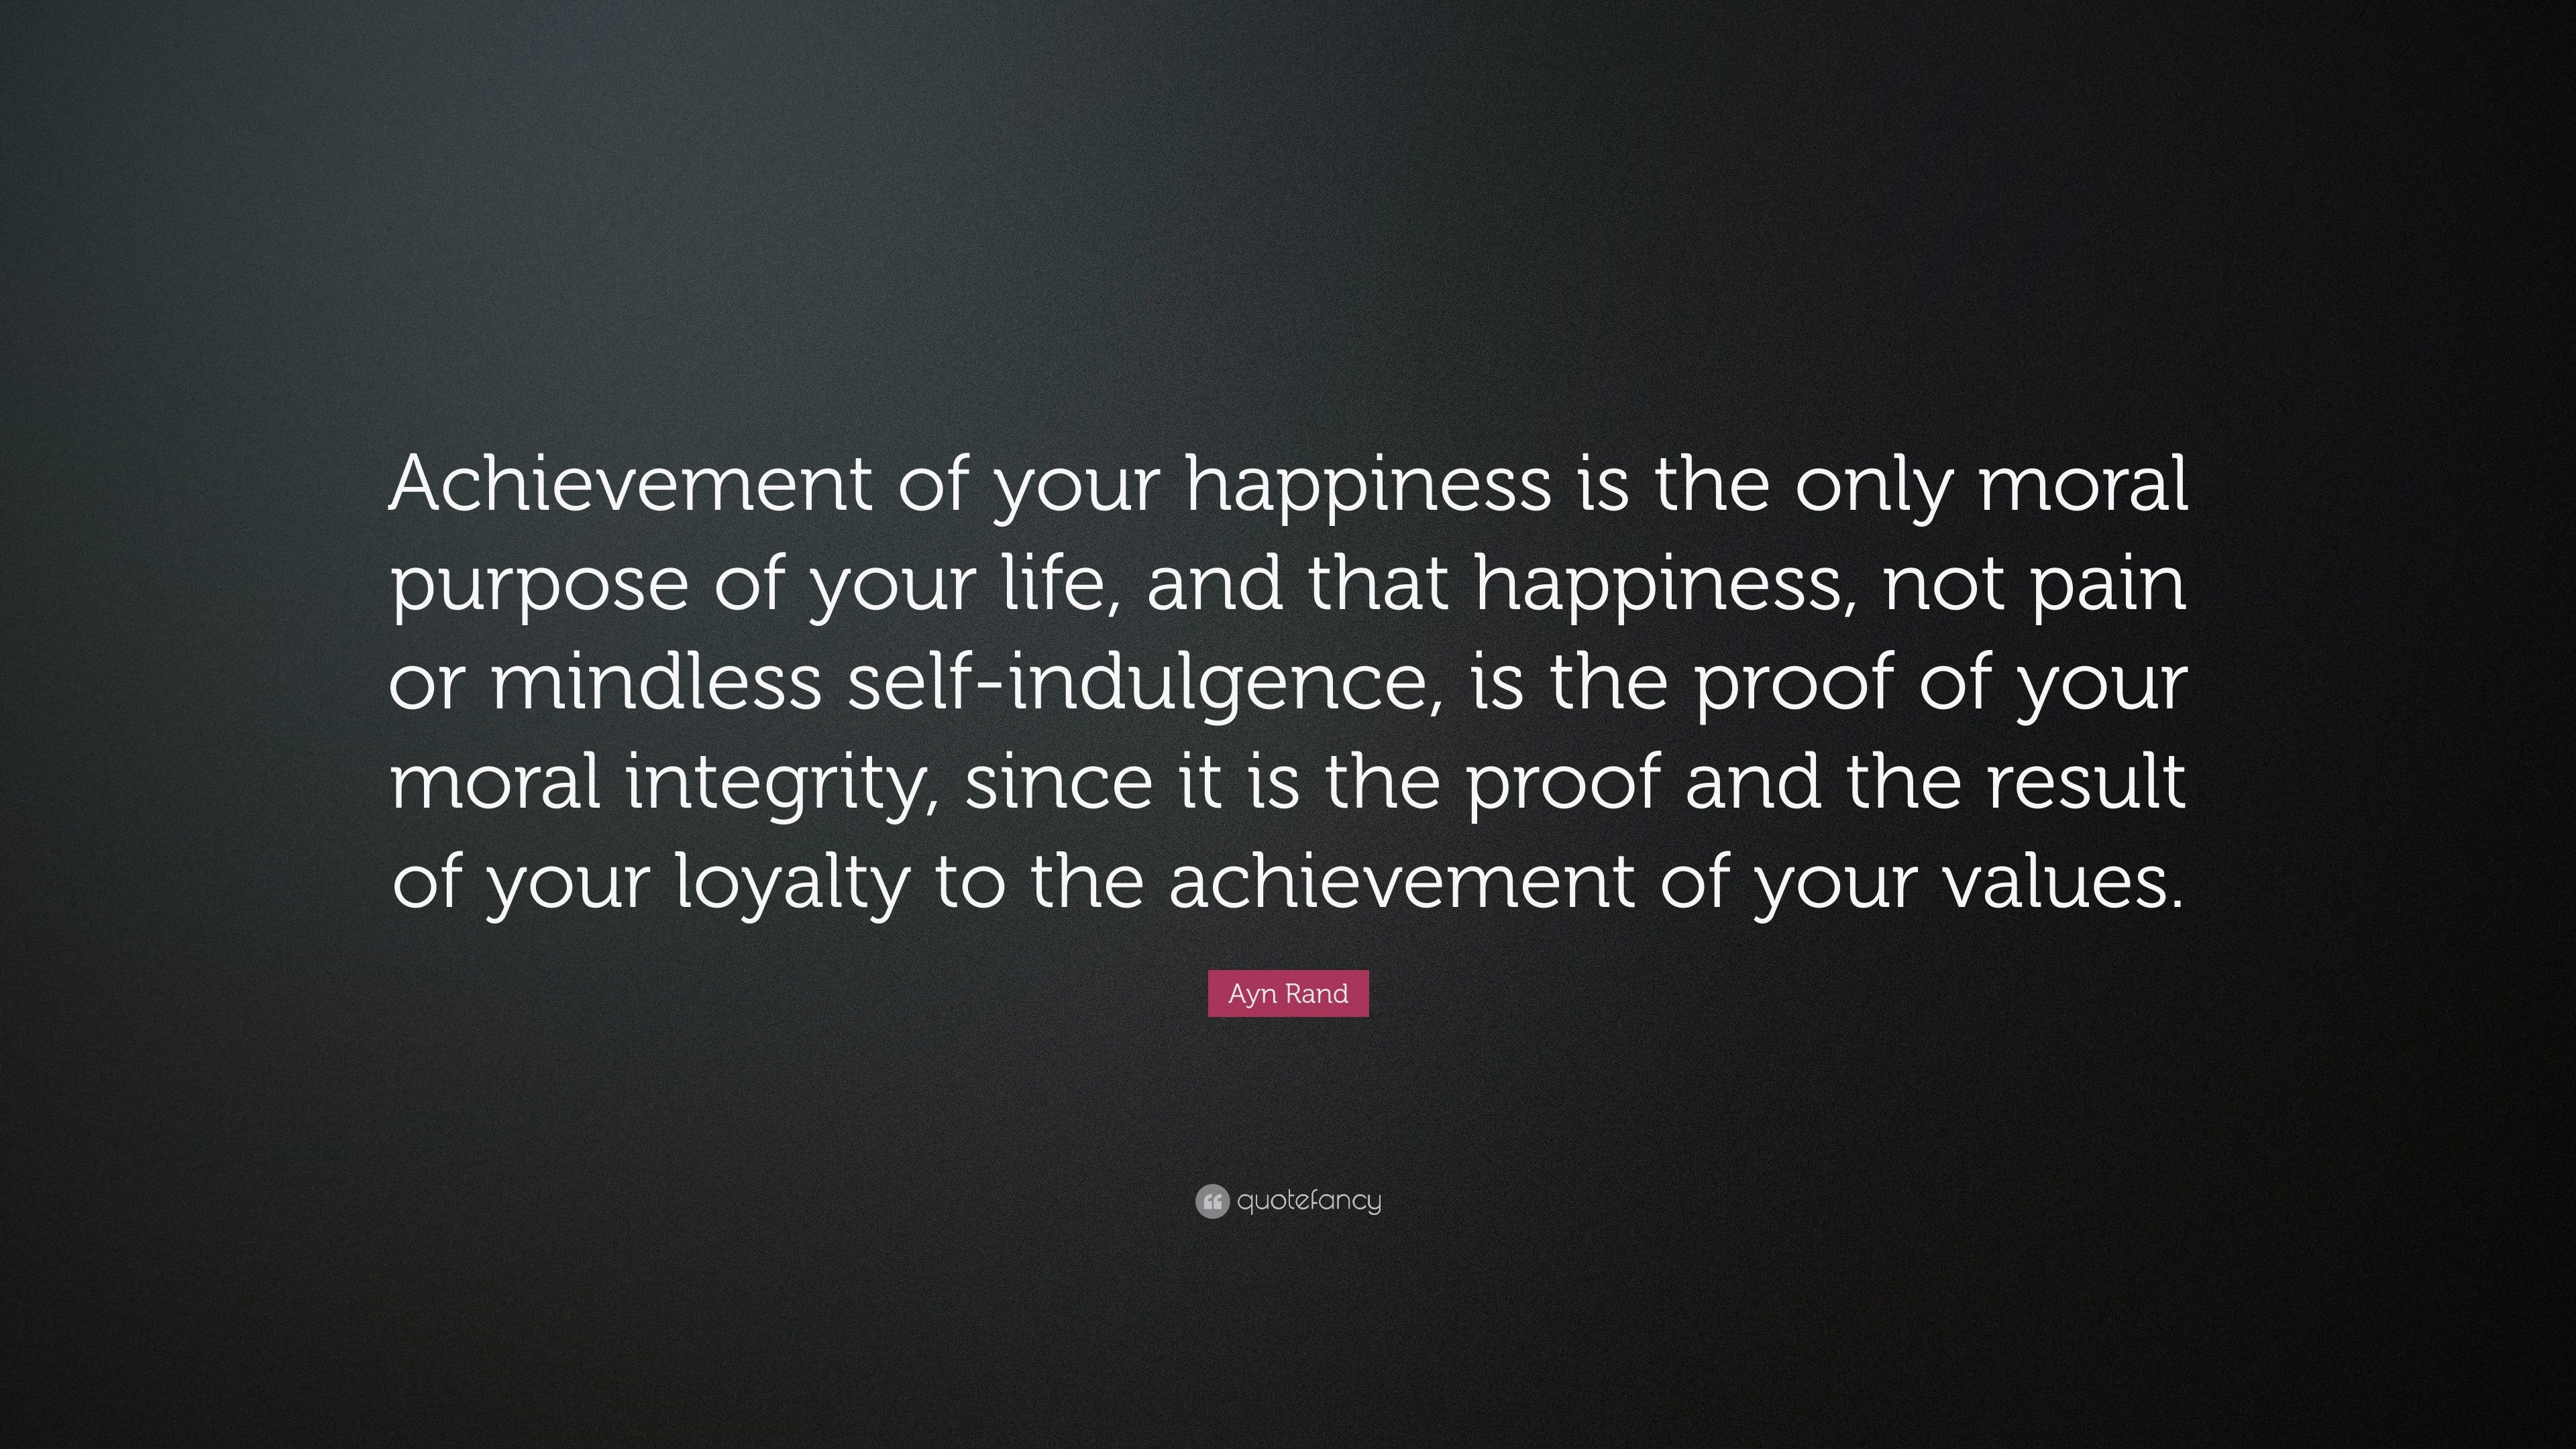 3840x2160 Ayn Rand Quote: “Achievement of your happiness is the only moral purpose of  your